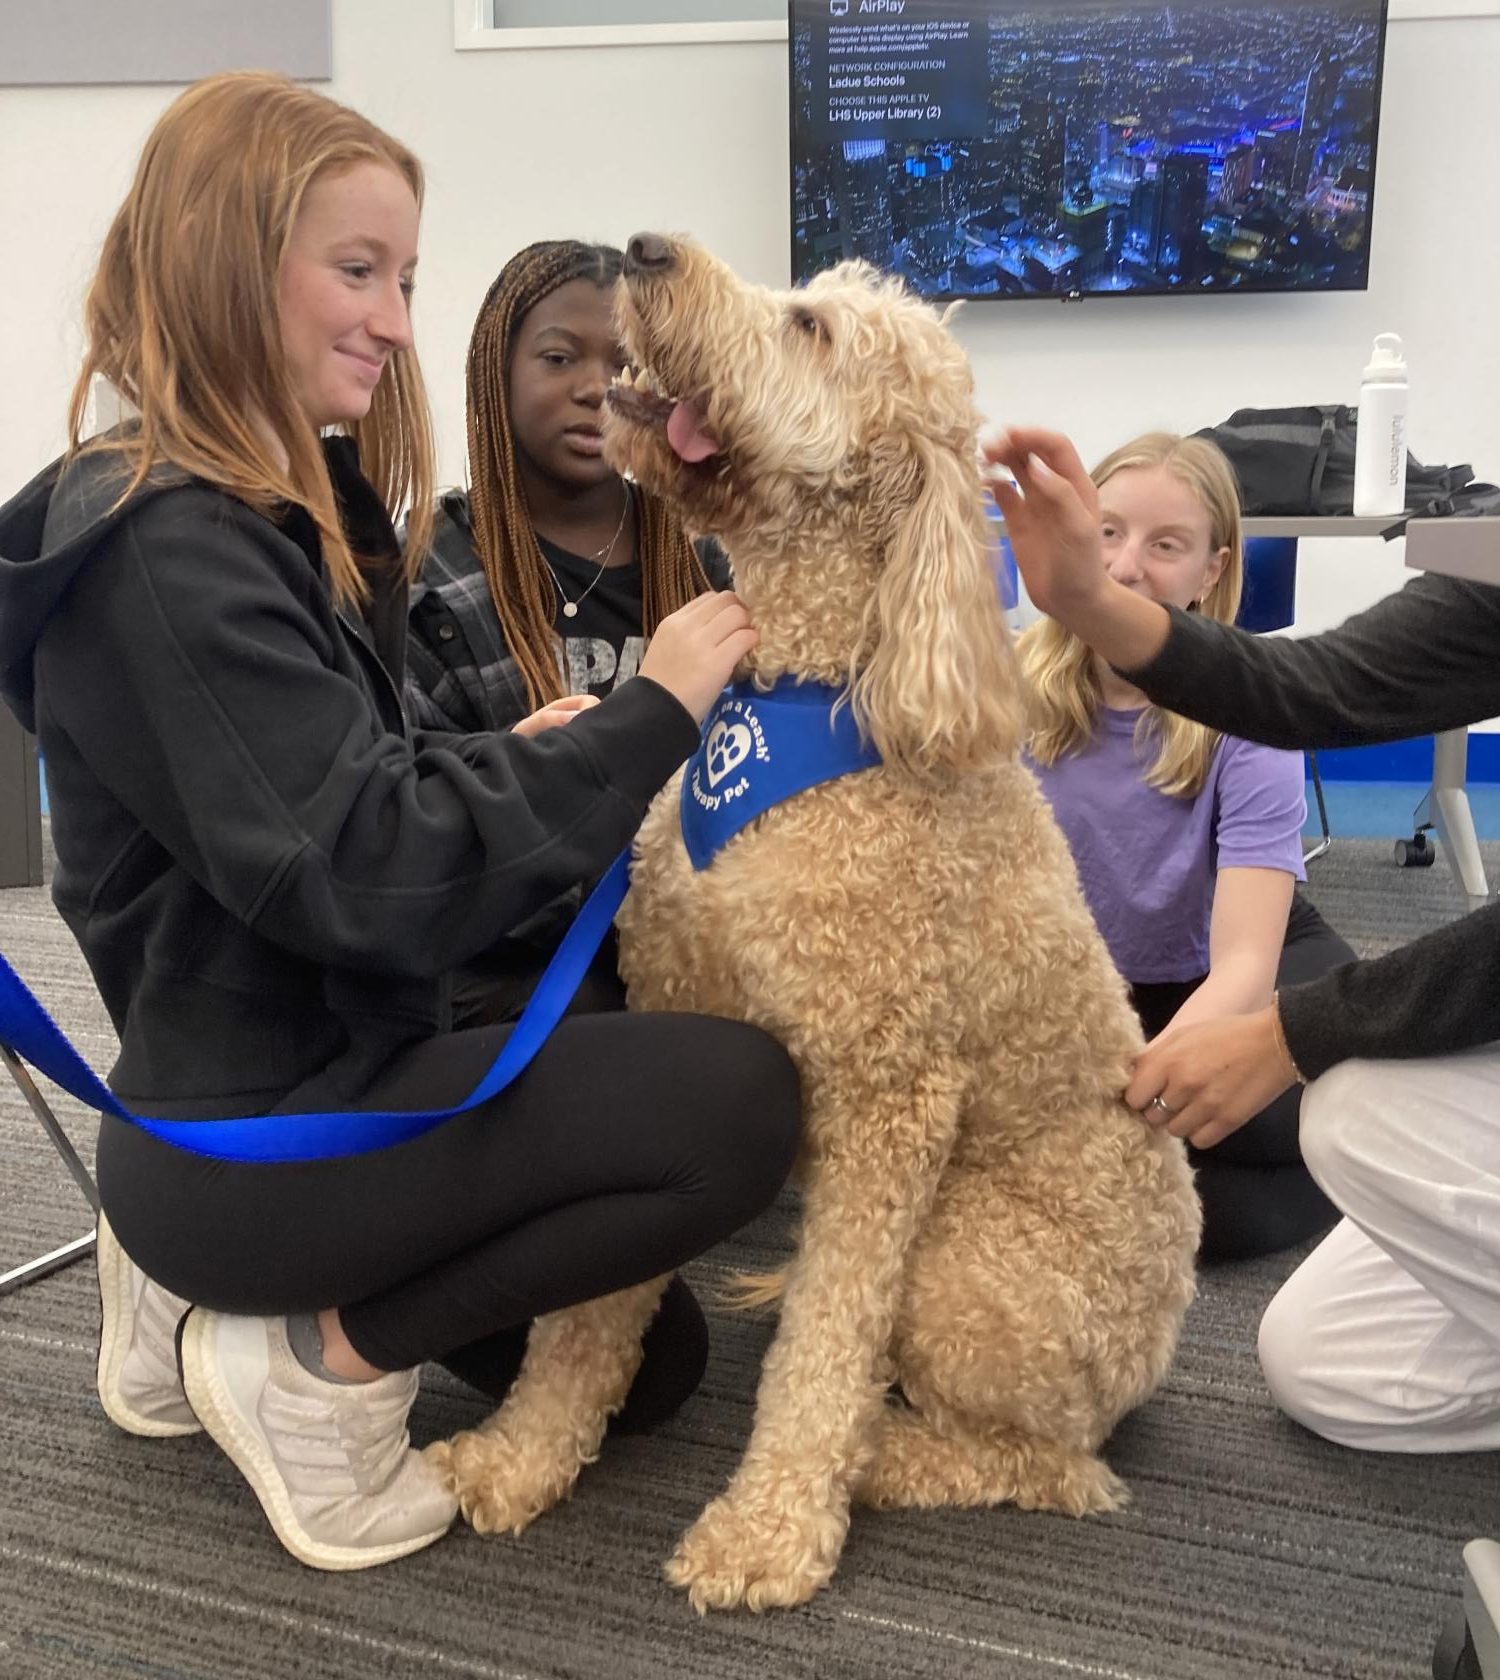 Allie Glidewell (10) pets Jax, a goldendoodle, during his visit Sept. 7. He was in therapy dog training for two years and still attends weekly classes to practice his skills. “We thought that [therapy dogs] sounded like a really cool opportunity that students would enjoy,” librarian Jennifer Tuttle said.